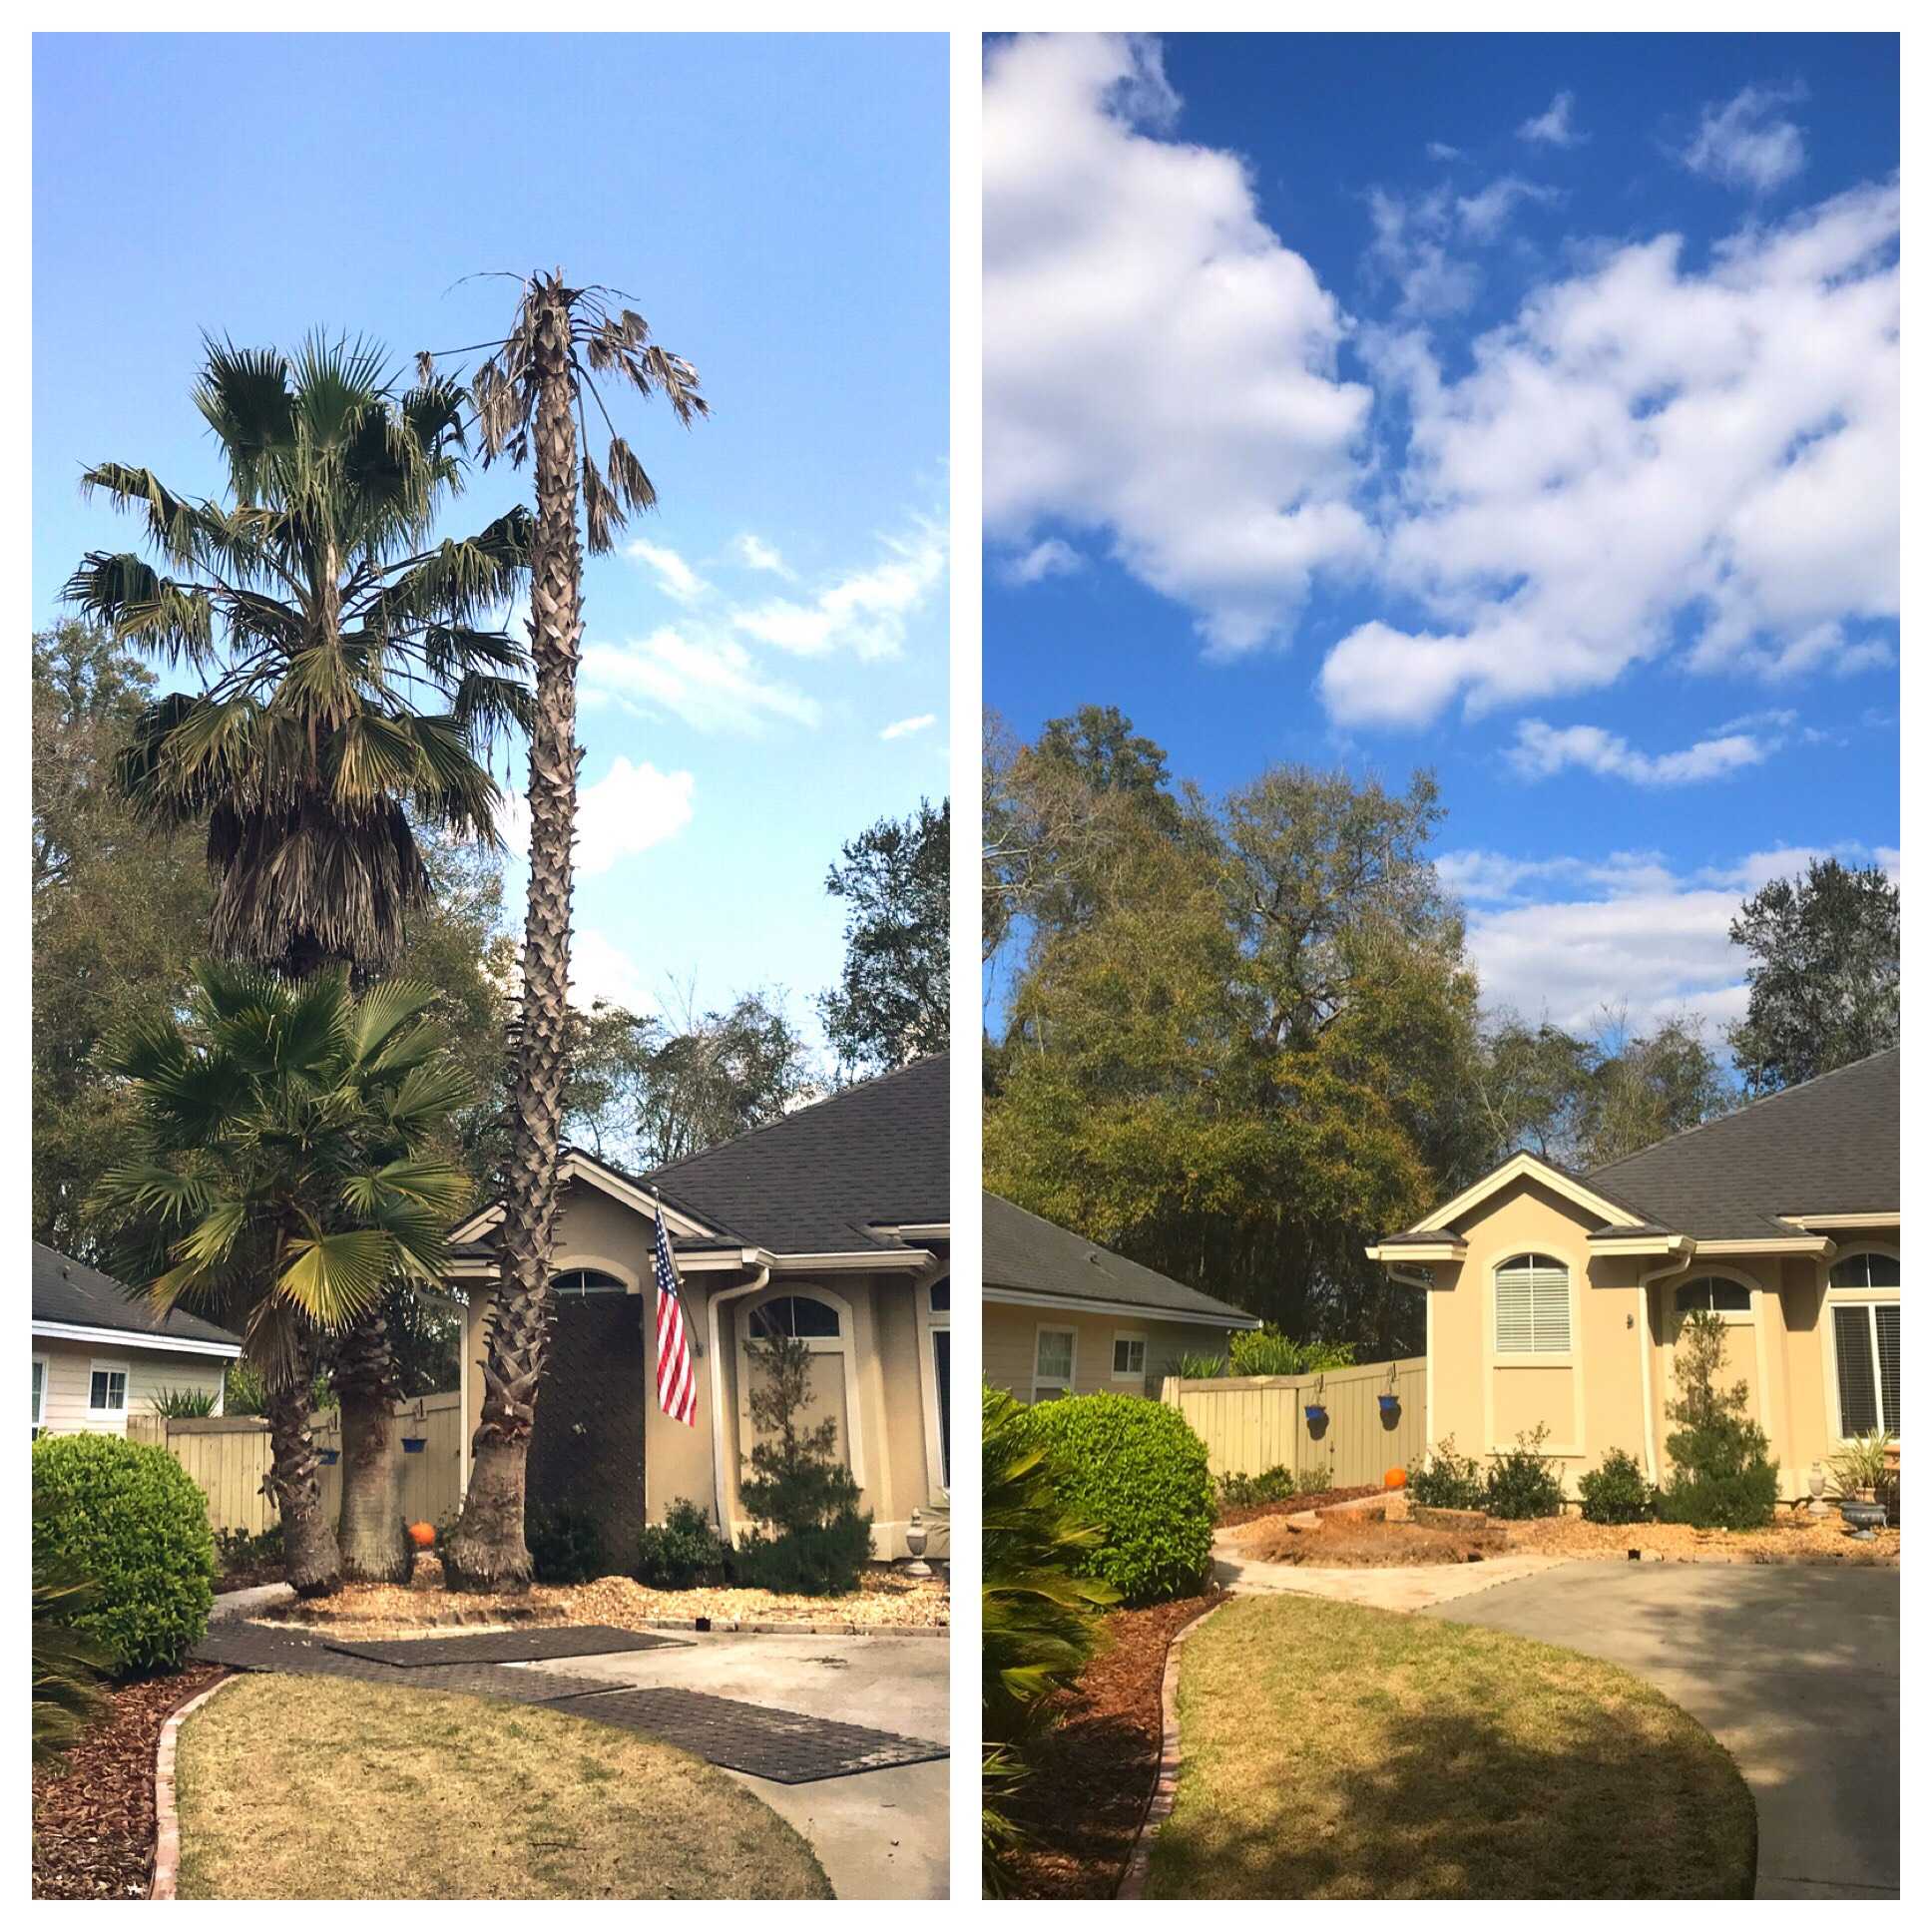 A left image showing a dead palm tree beside a house, and a right image showing the house after the tree has been removed.